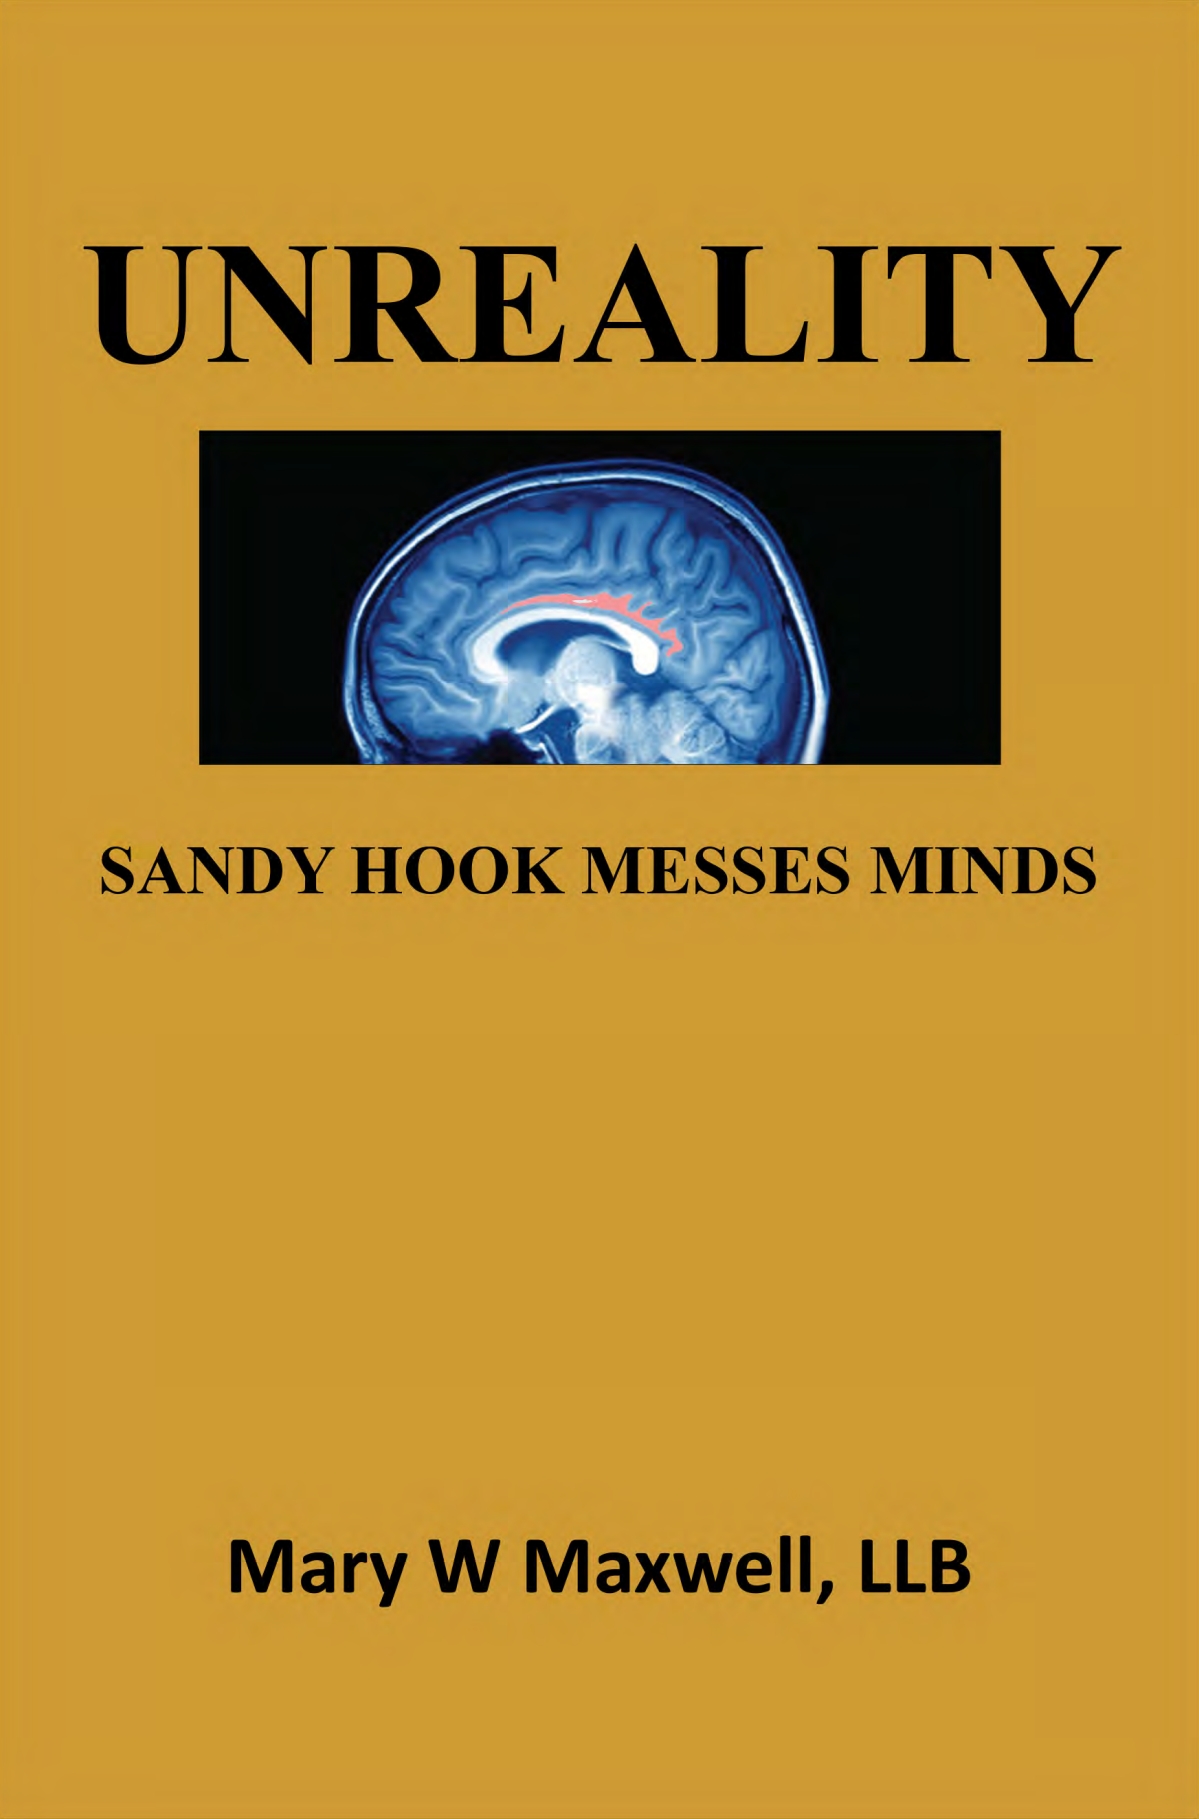 Unreality [ Sandy Hook Messes Minds ] ( book ) ... Mary W Maxwell